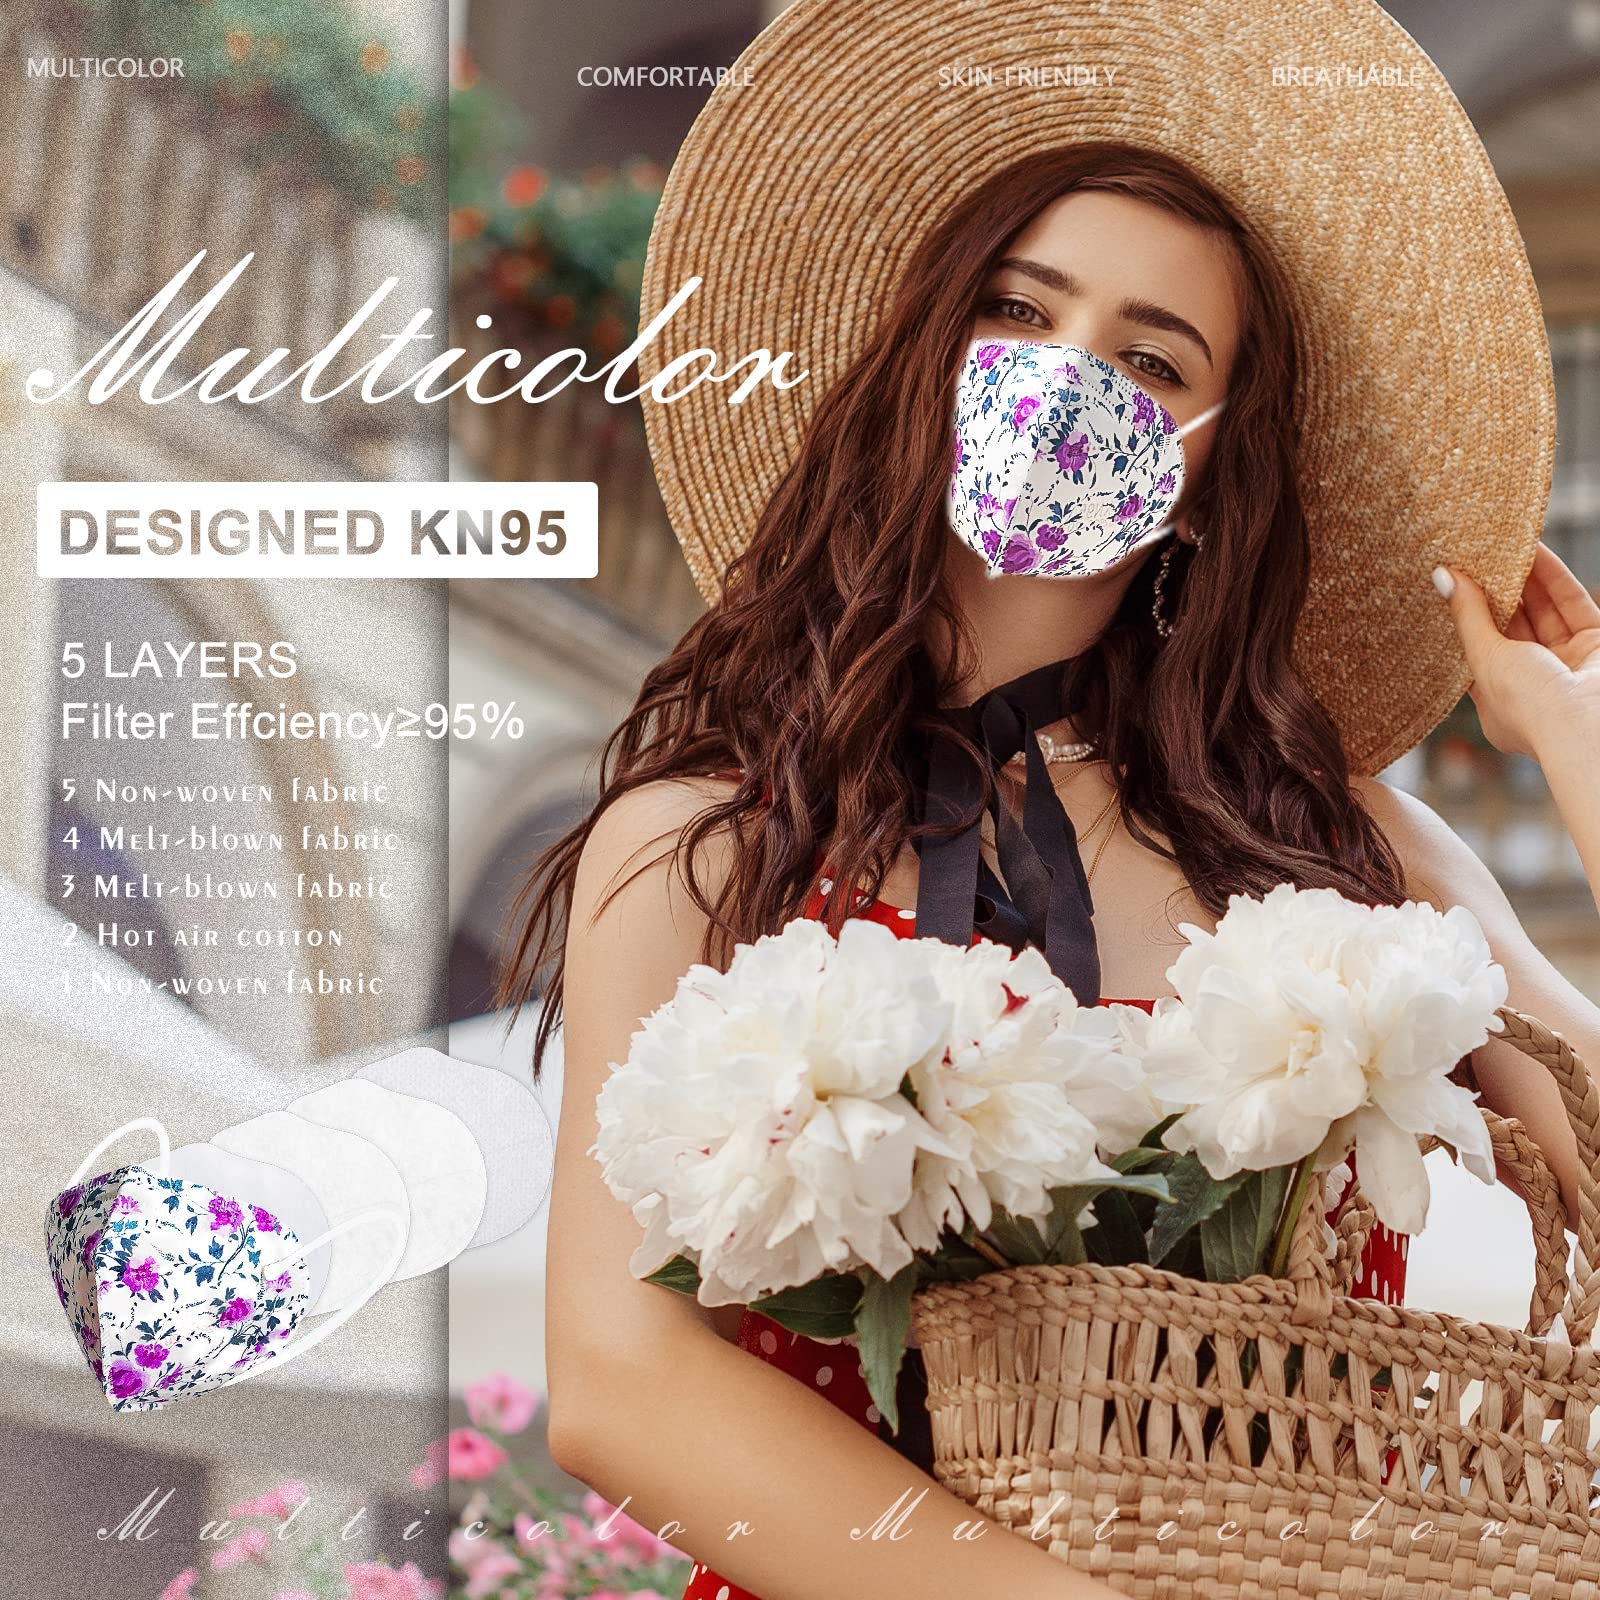 KN95 Face Masks, 60 Pack Individually Wrapped KN95 Masks, 5 layer Colorful Floral Face Mask with Design for Adults Women Men